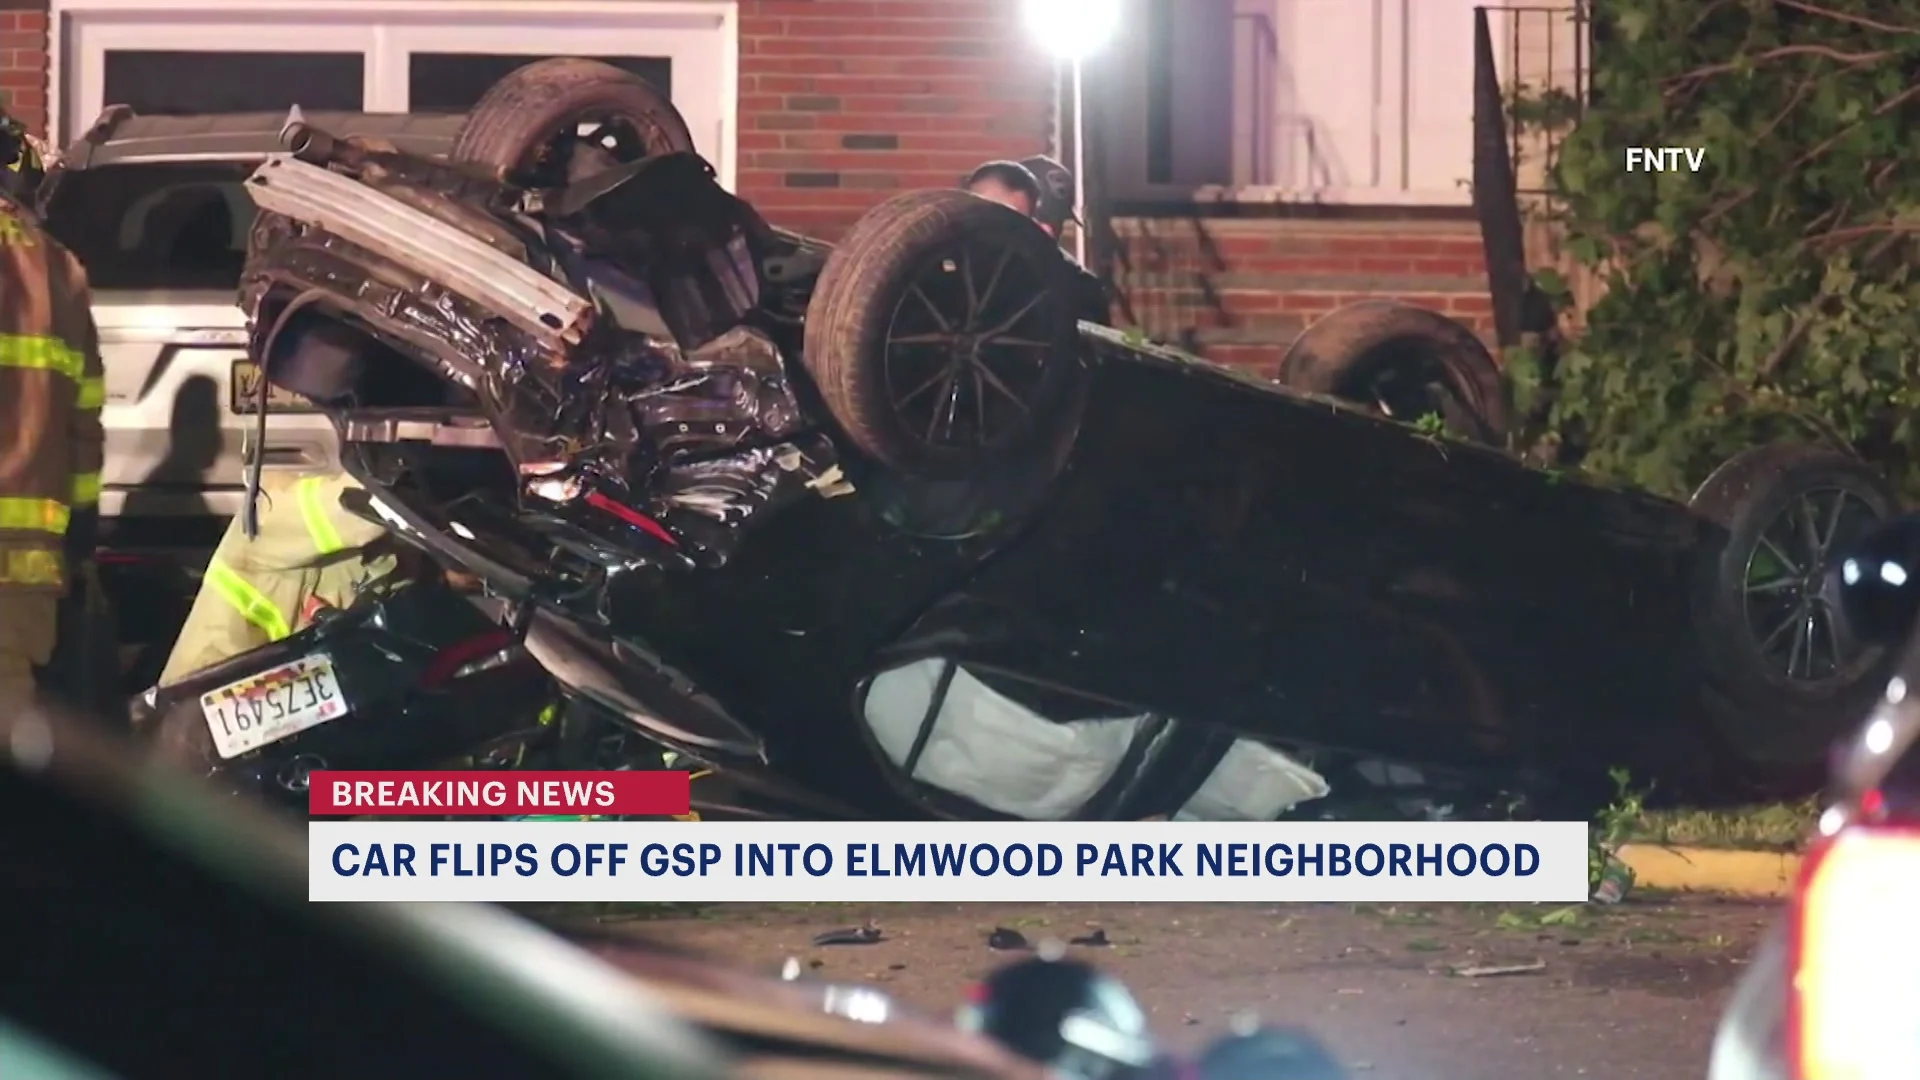 Car flips off Garden State Parkway in Elmwood Park, narrowly misses hitting a house